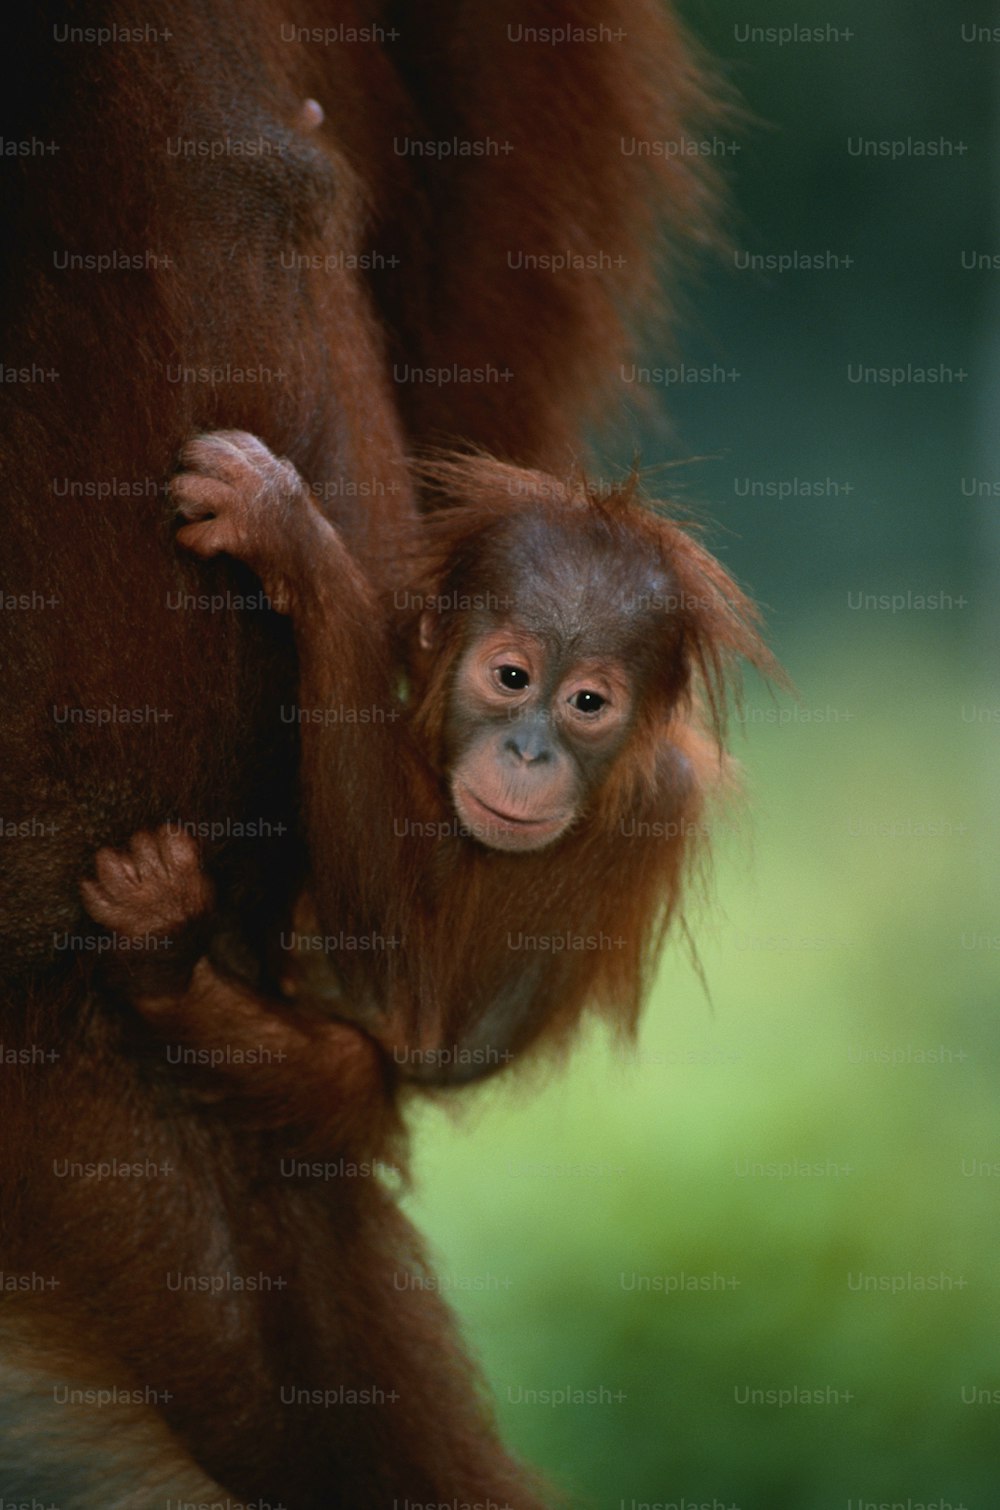 a baby oranguel hangs from its mother's back